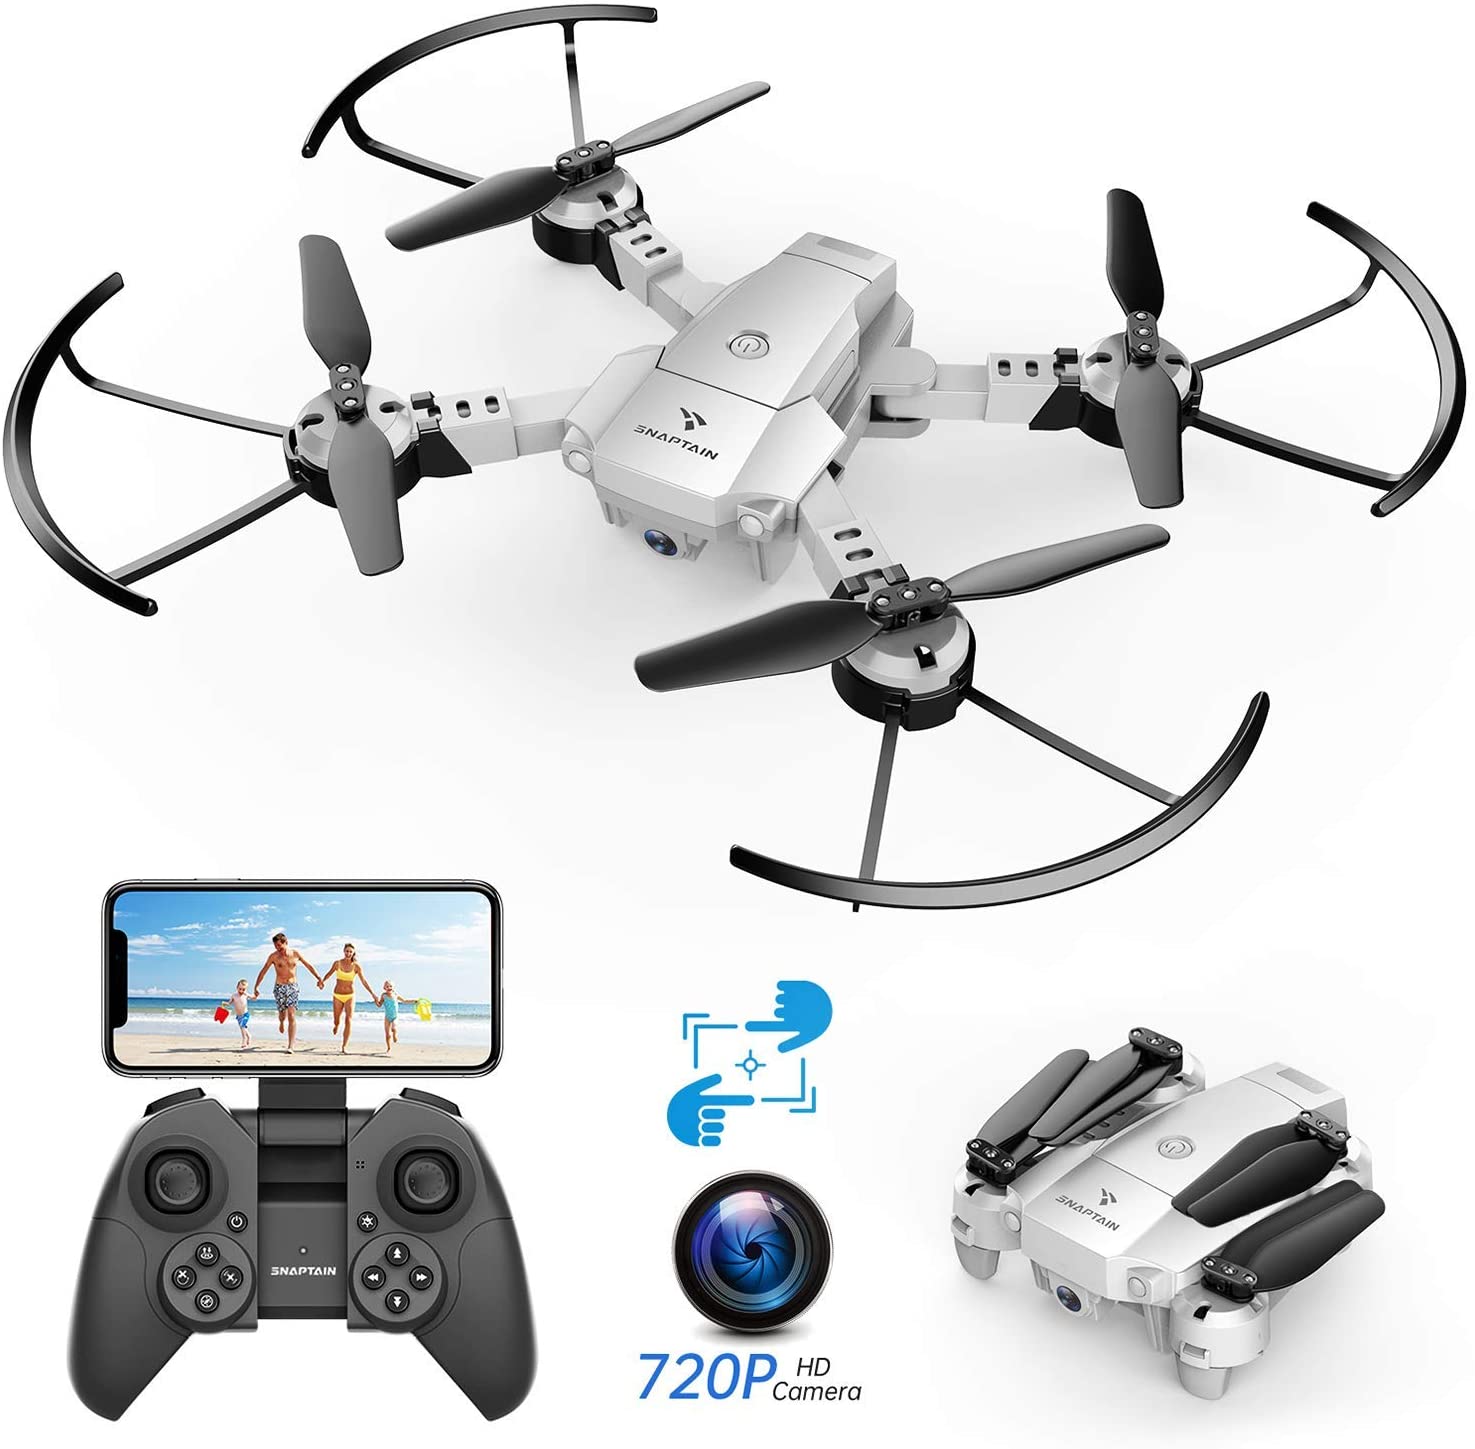 SNAPTAIN A10 Mini Foldable RC Quadcopter Drone For Kids